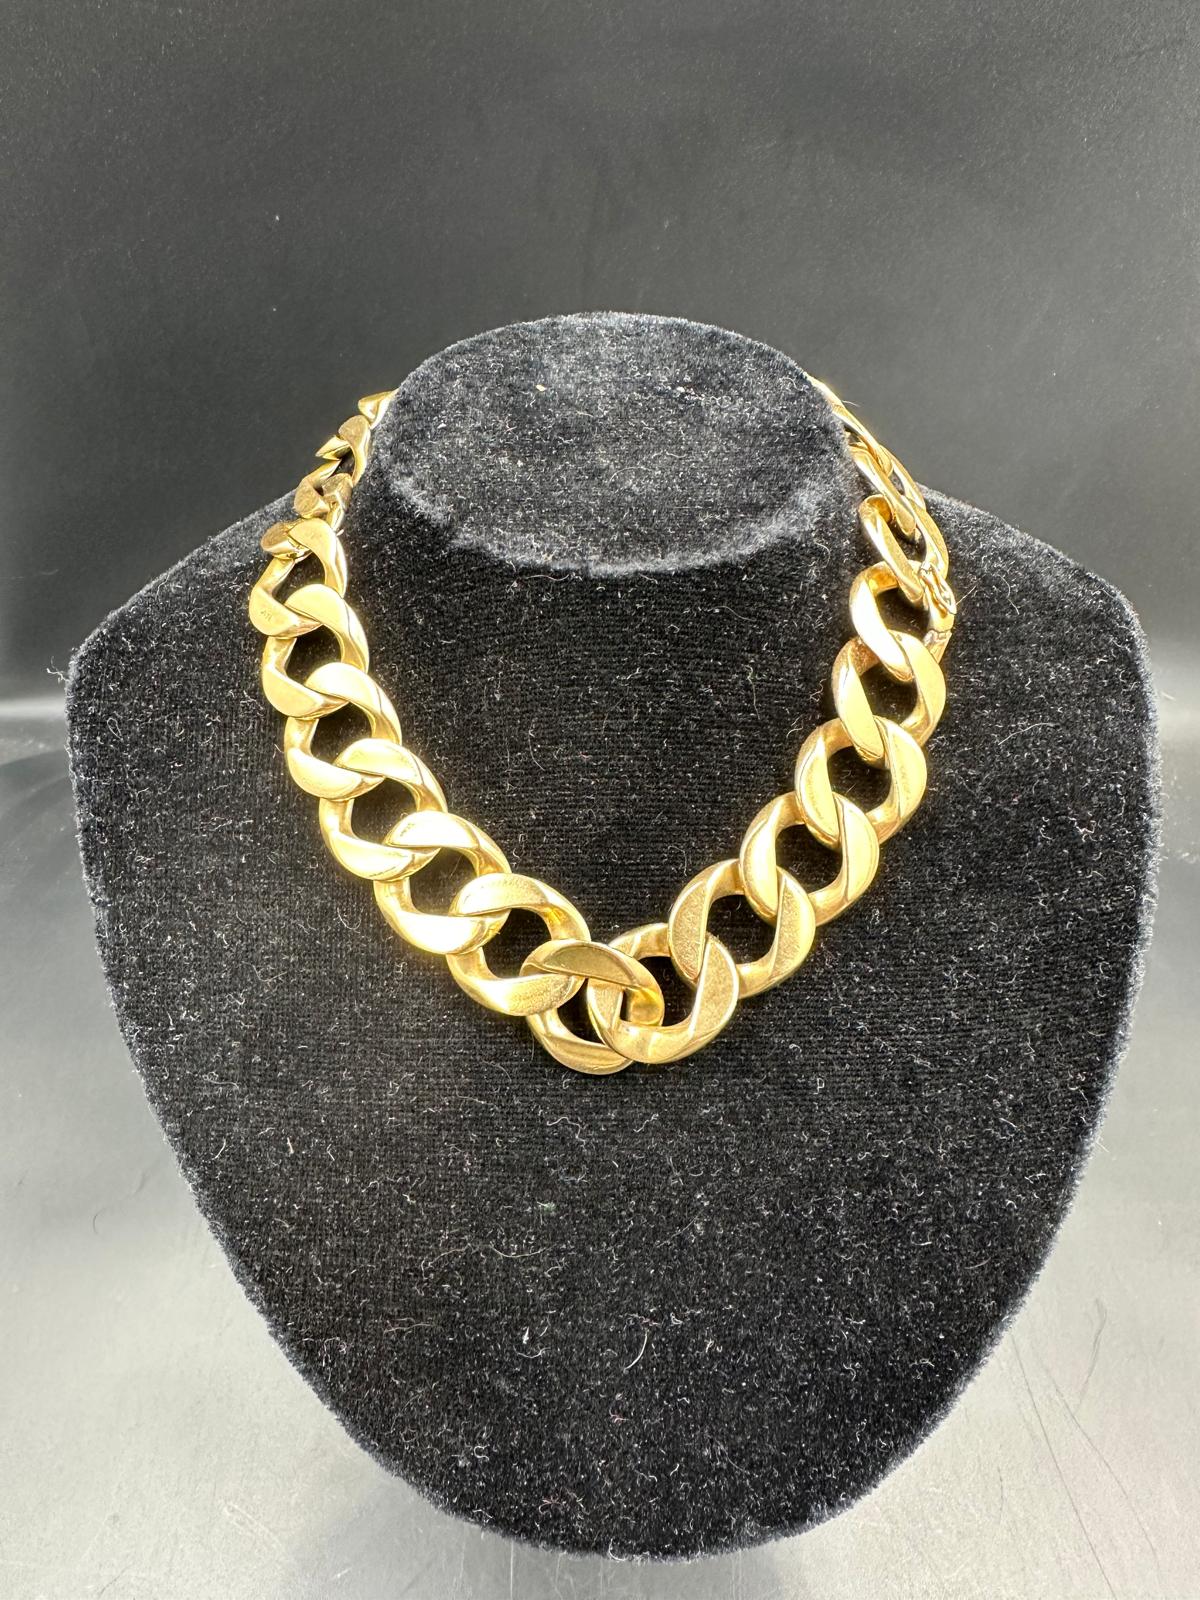 An impressive vintage Cartier necklace in 18ct yellow gold with a catch that means the necklace